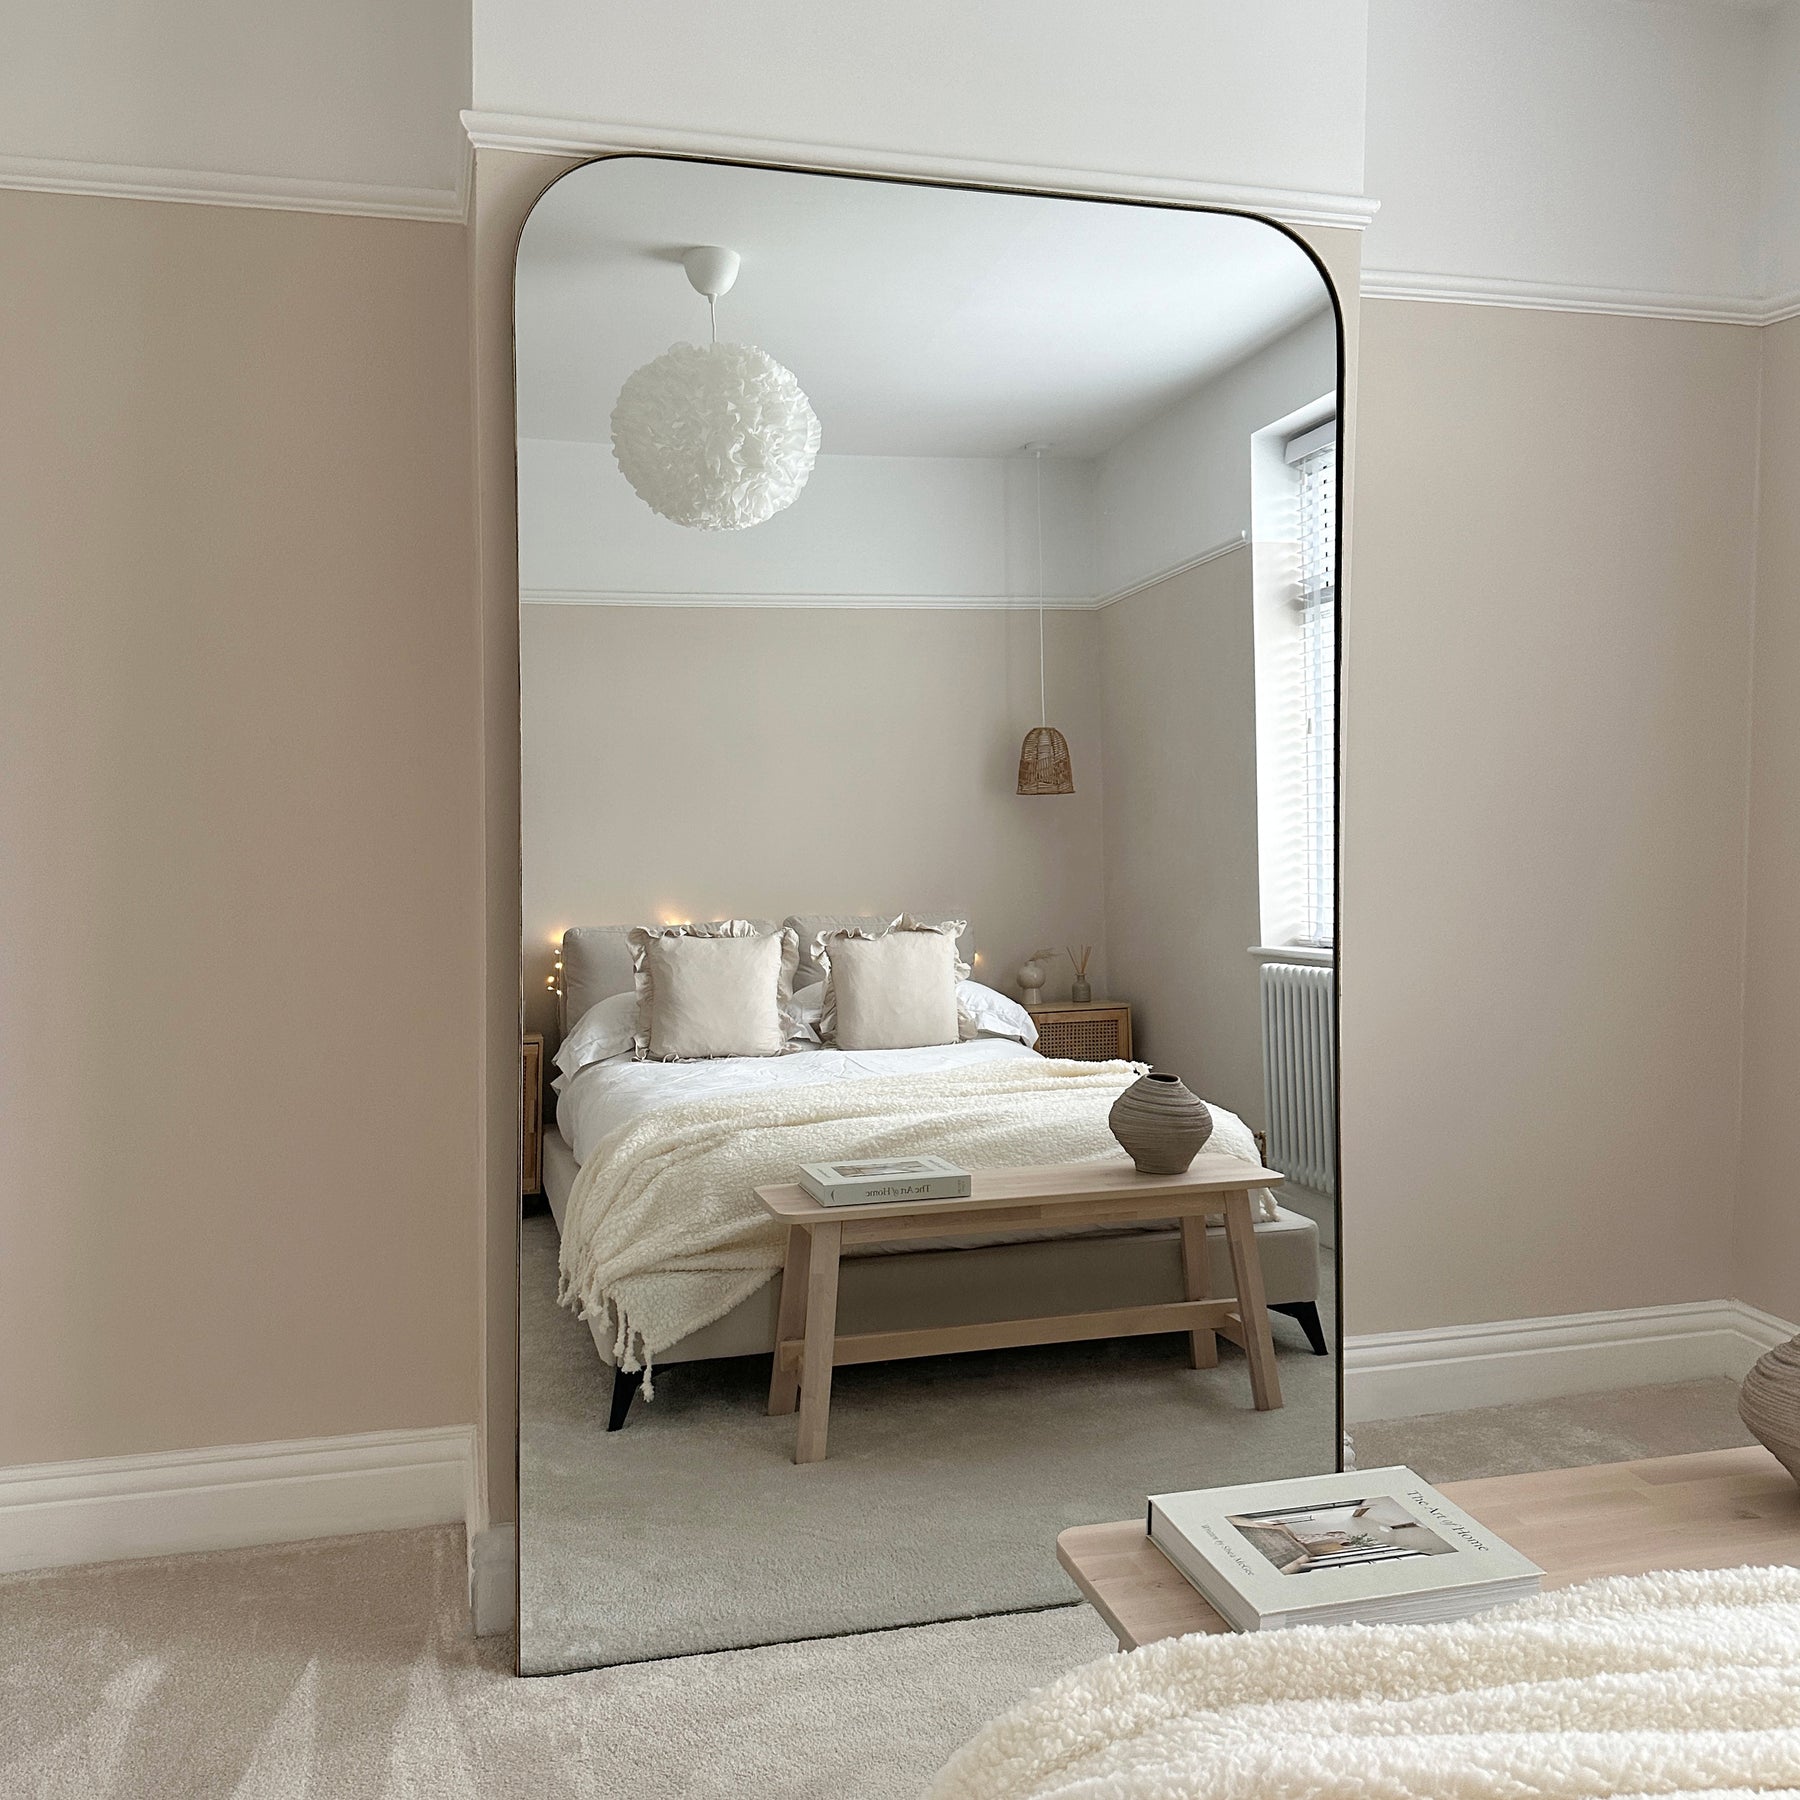 Theo - Full Length Gold Curved Extra Large Metal Mirror 200cm x 120cm